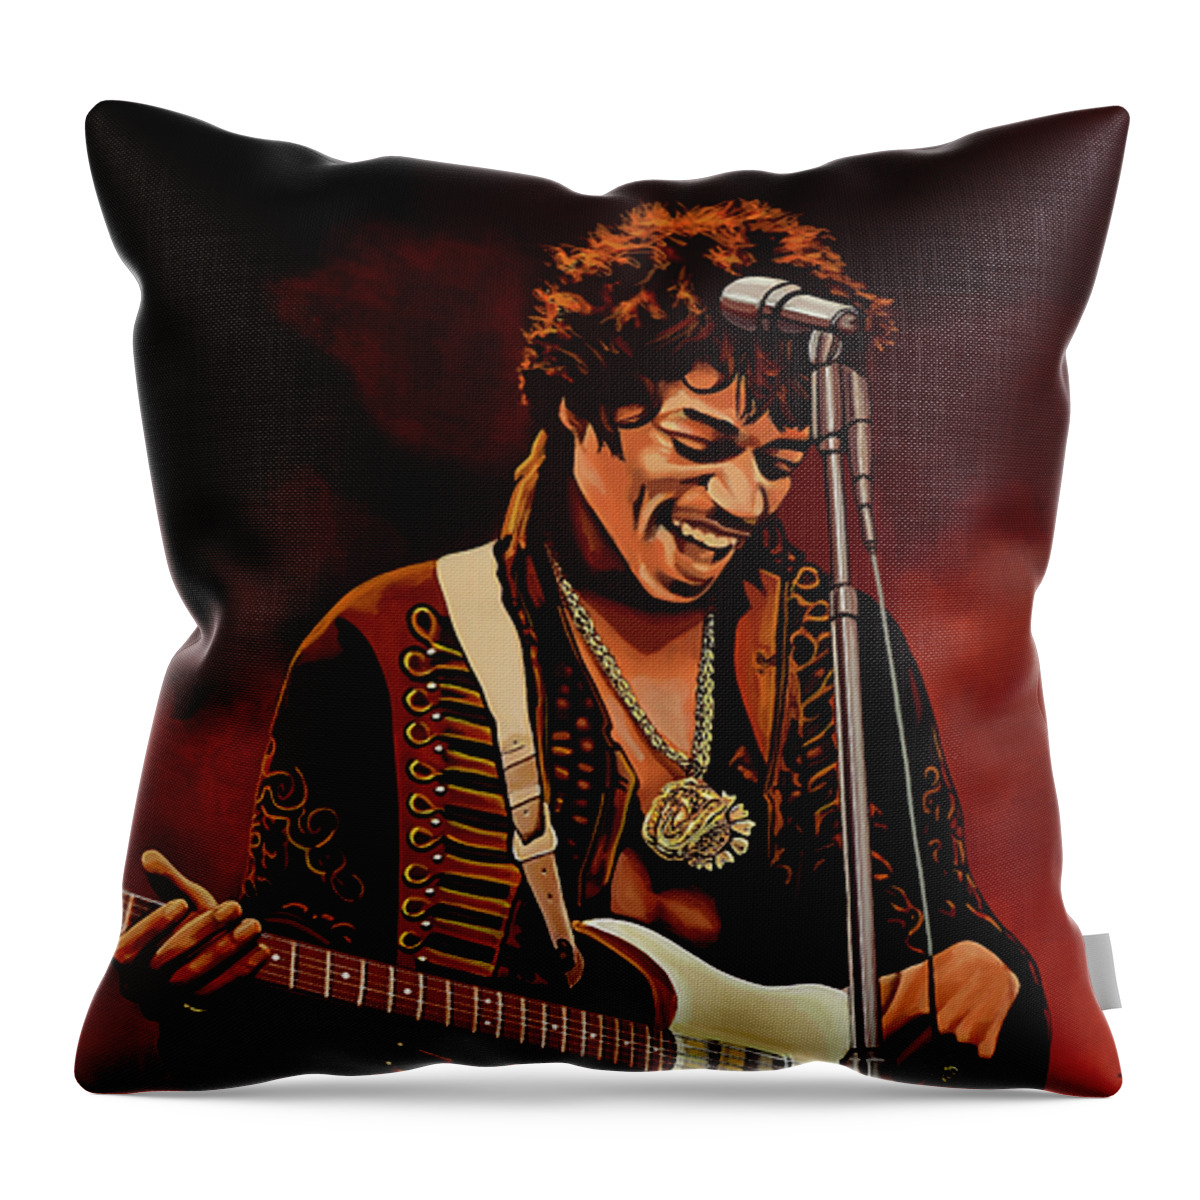 Jimi Hendrix Throw Pillow featuring the painting Jimi Hendrix Painting by Paul Meijering